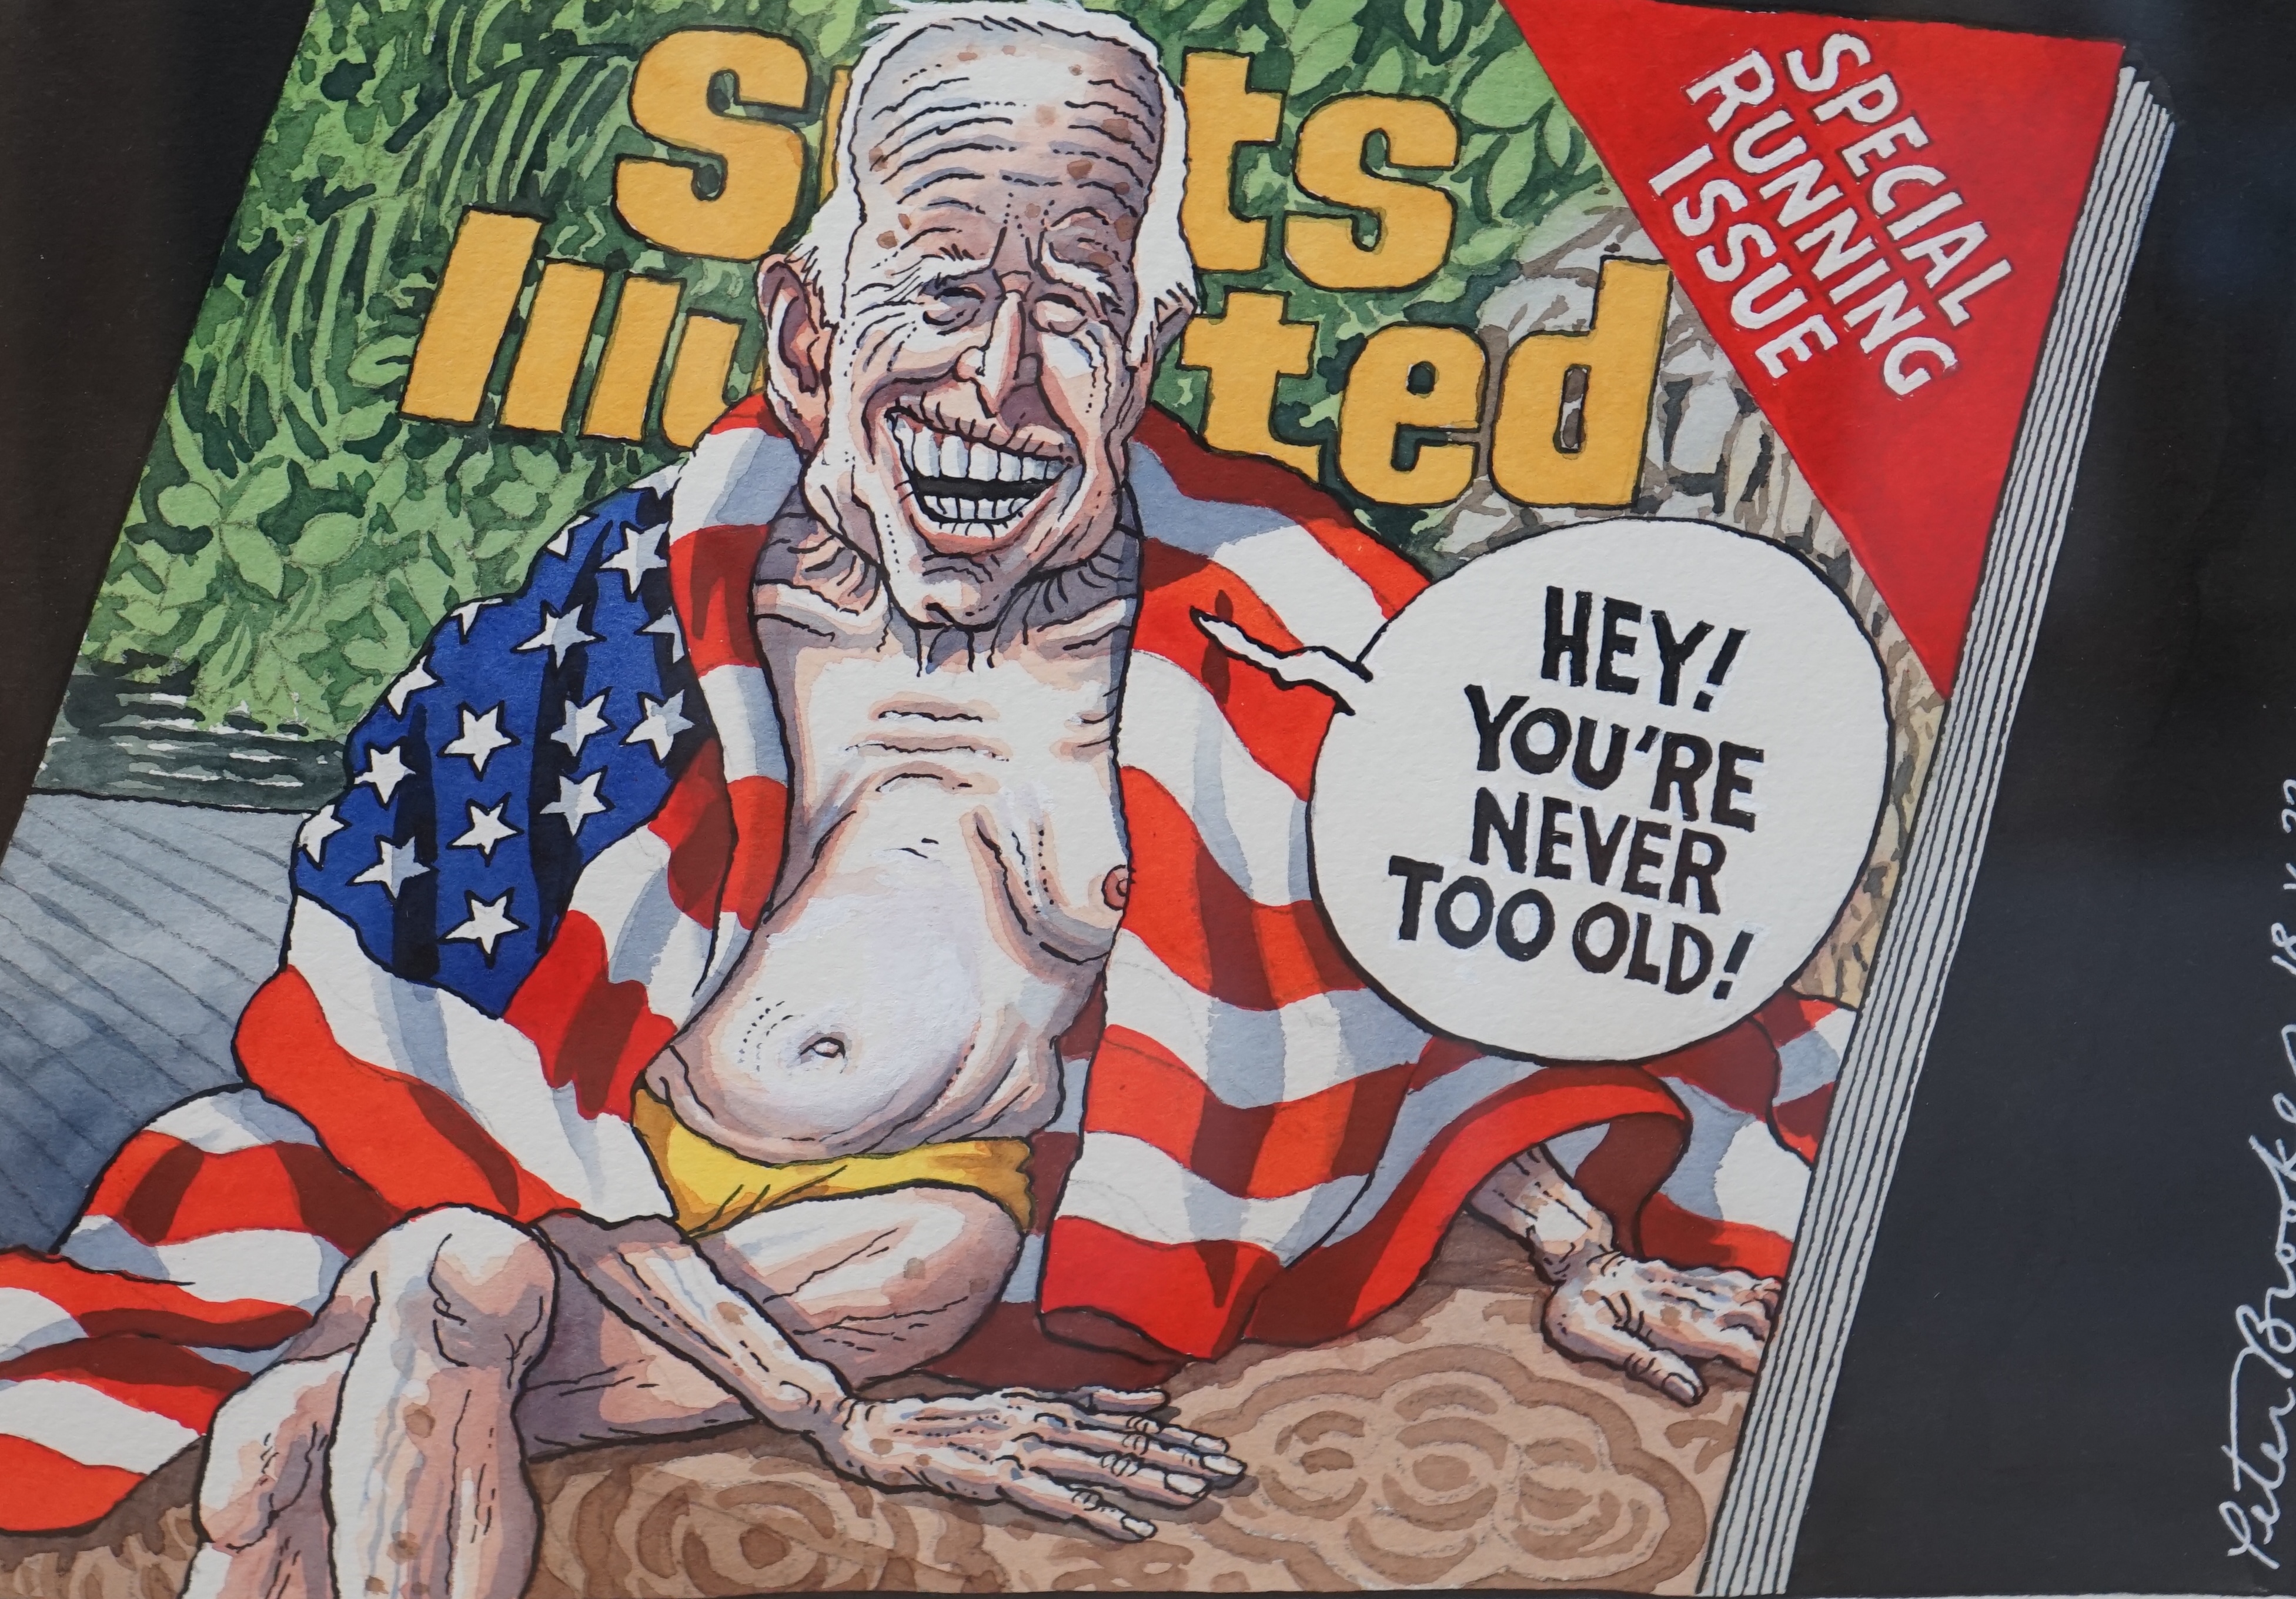 Peter Brookes (b.1943), ink and watercolour, cartoon, 'Hey! You're never too old!', signed and dated 18 V 23, illustrated The Times 18th May 2023, 20 x 28cm. Condition - good